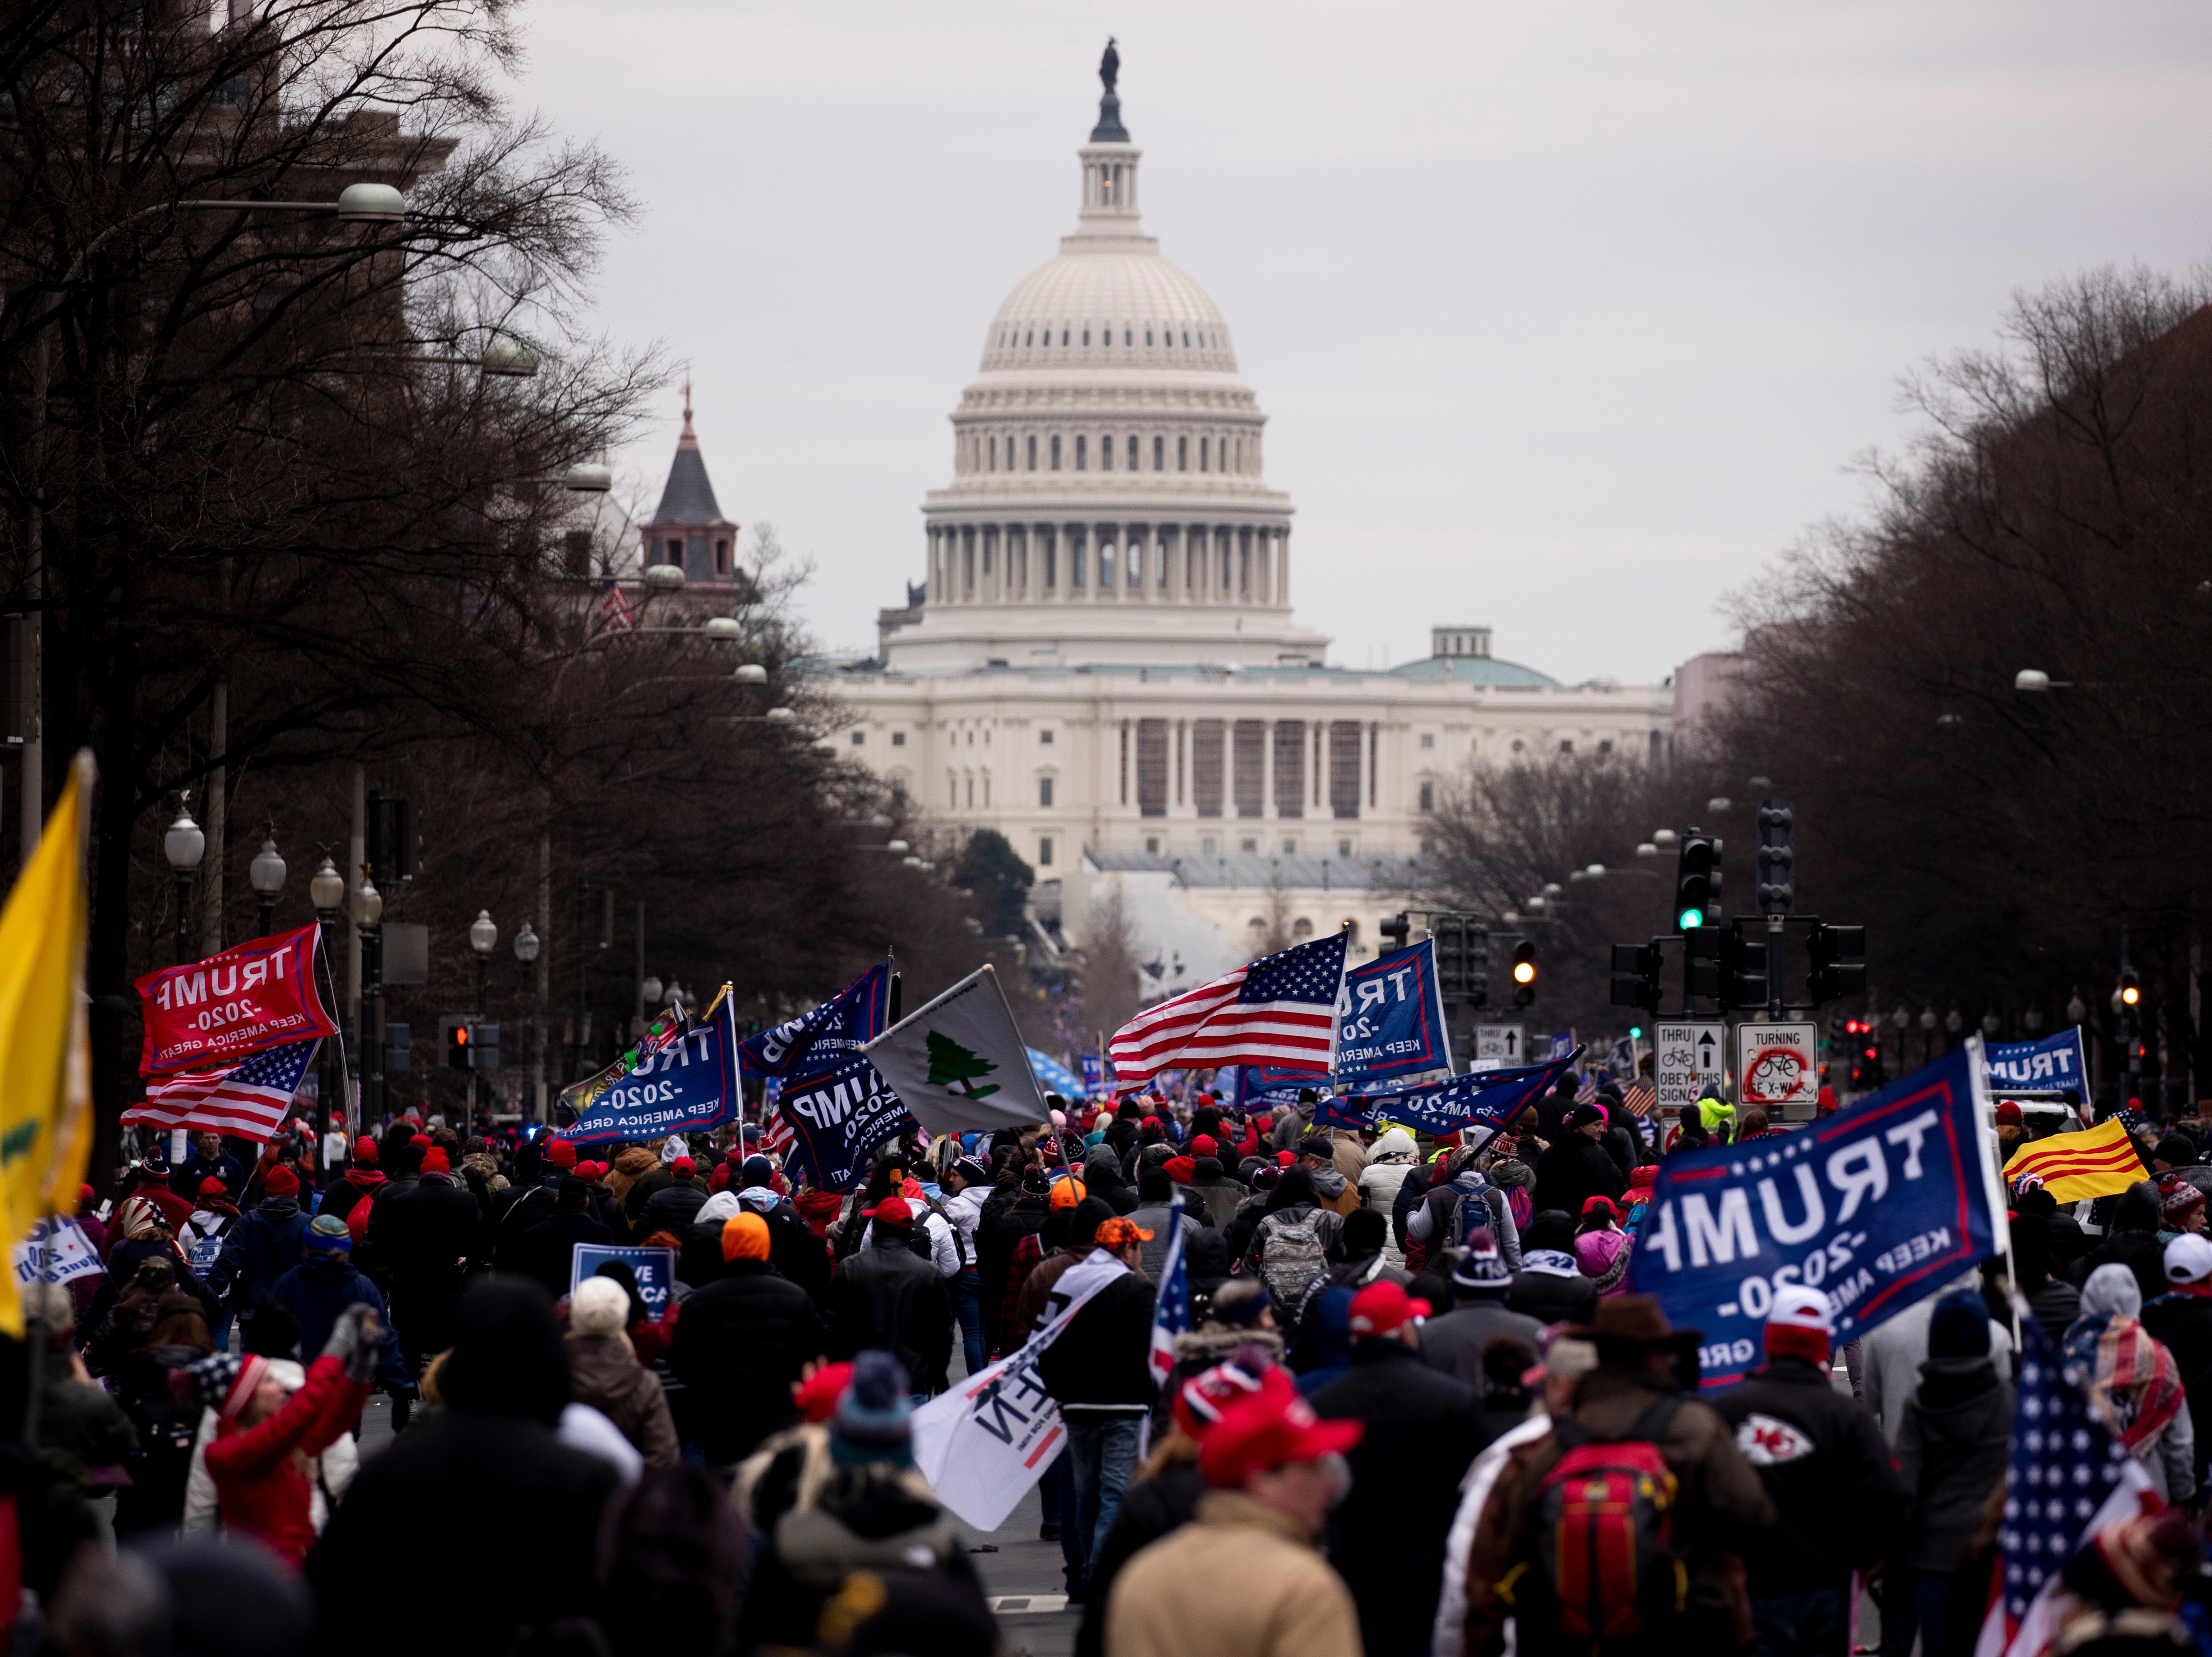 A crowd of Trump supporters prepares to march on the Capitol on 6 January 2021